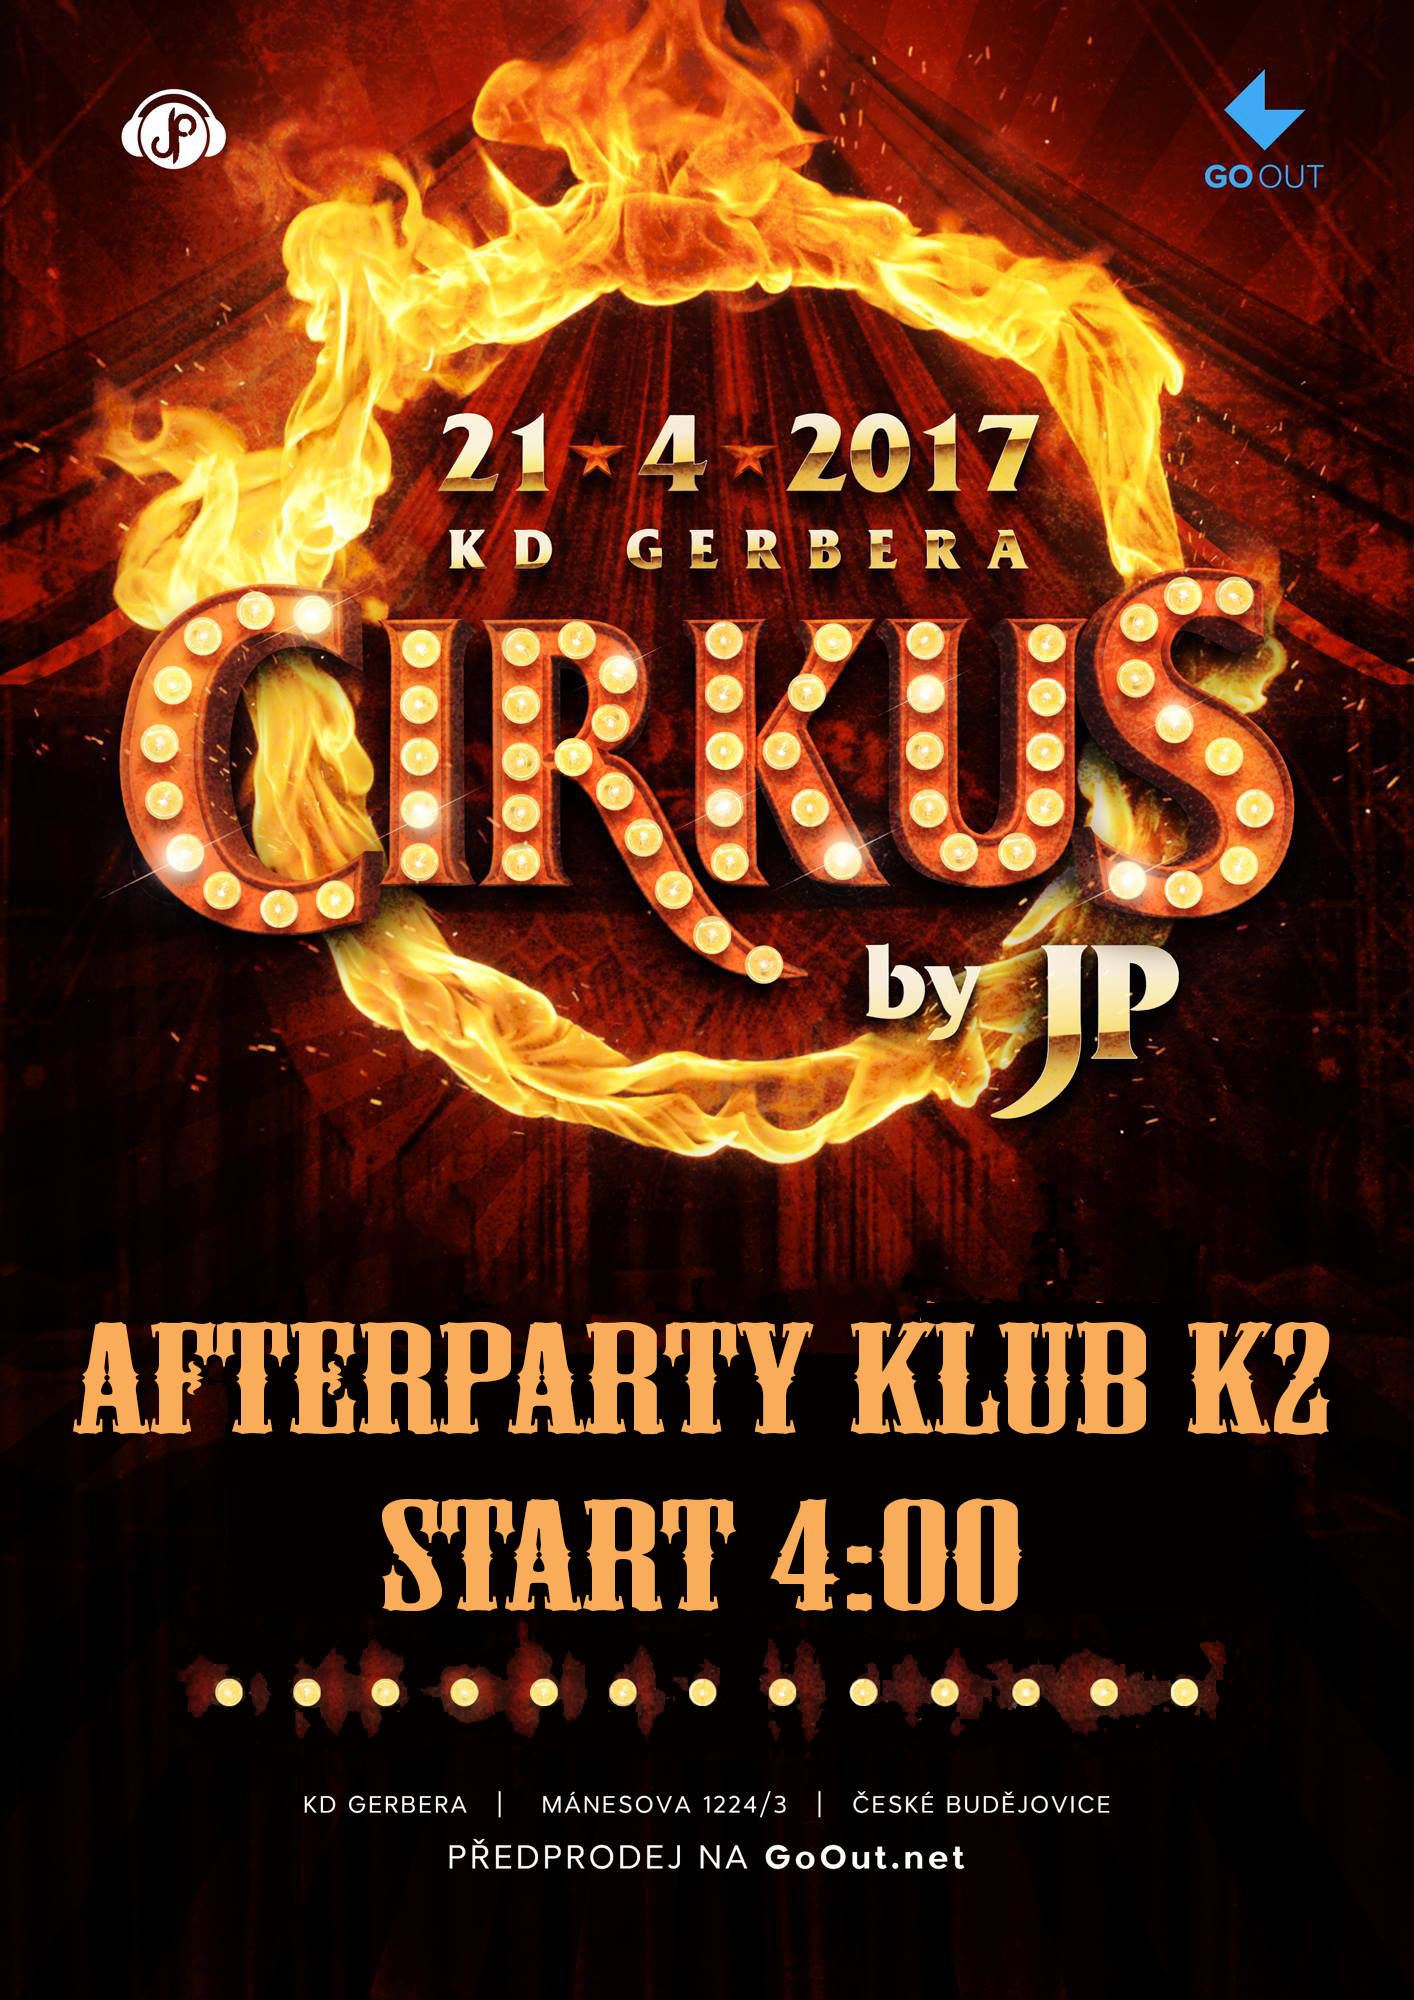 CIRKUS BY JP AFTERPARTY